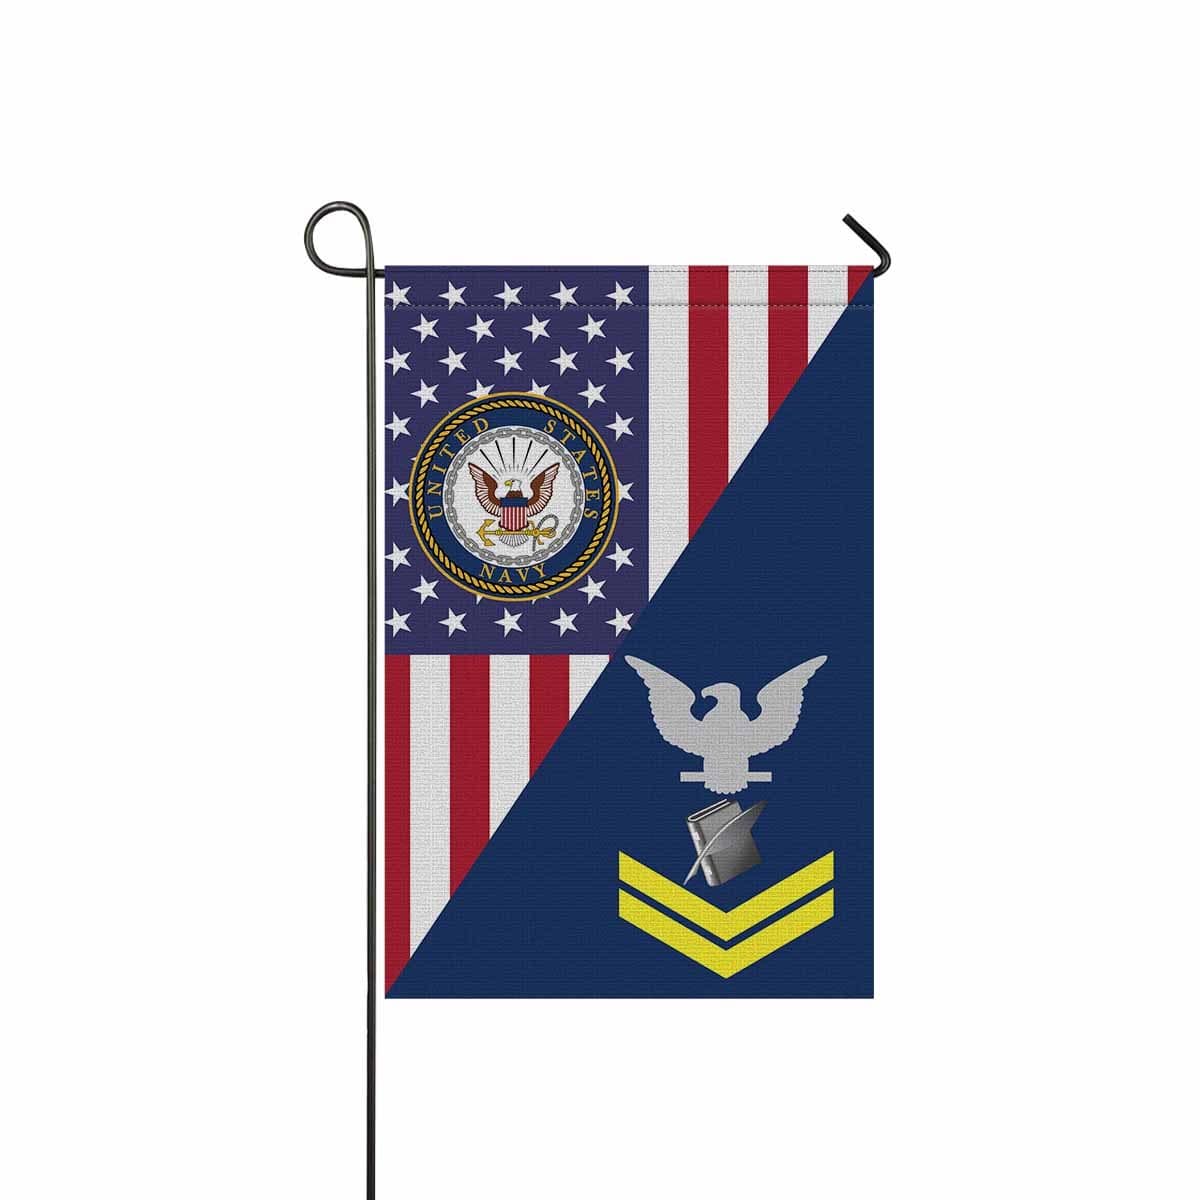 Navy Personnel Specialist Navy PS E-5 Gold Stripe Garden Flag/Yard Flag 12 inches x 18 inches Twin-Side Printing-GDFlag-Navy-Rating-Veterans Nation